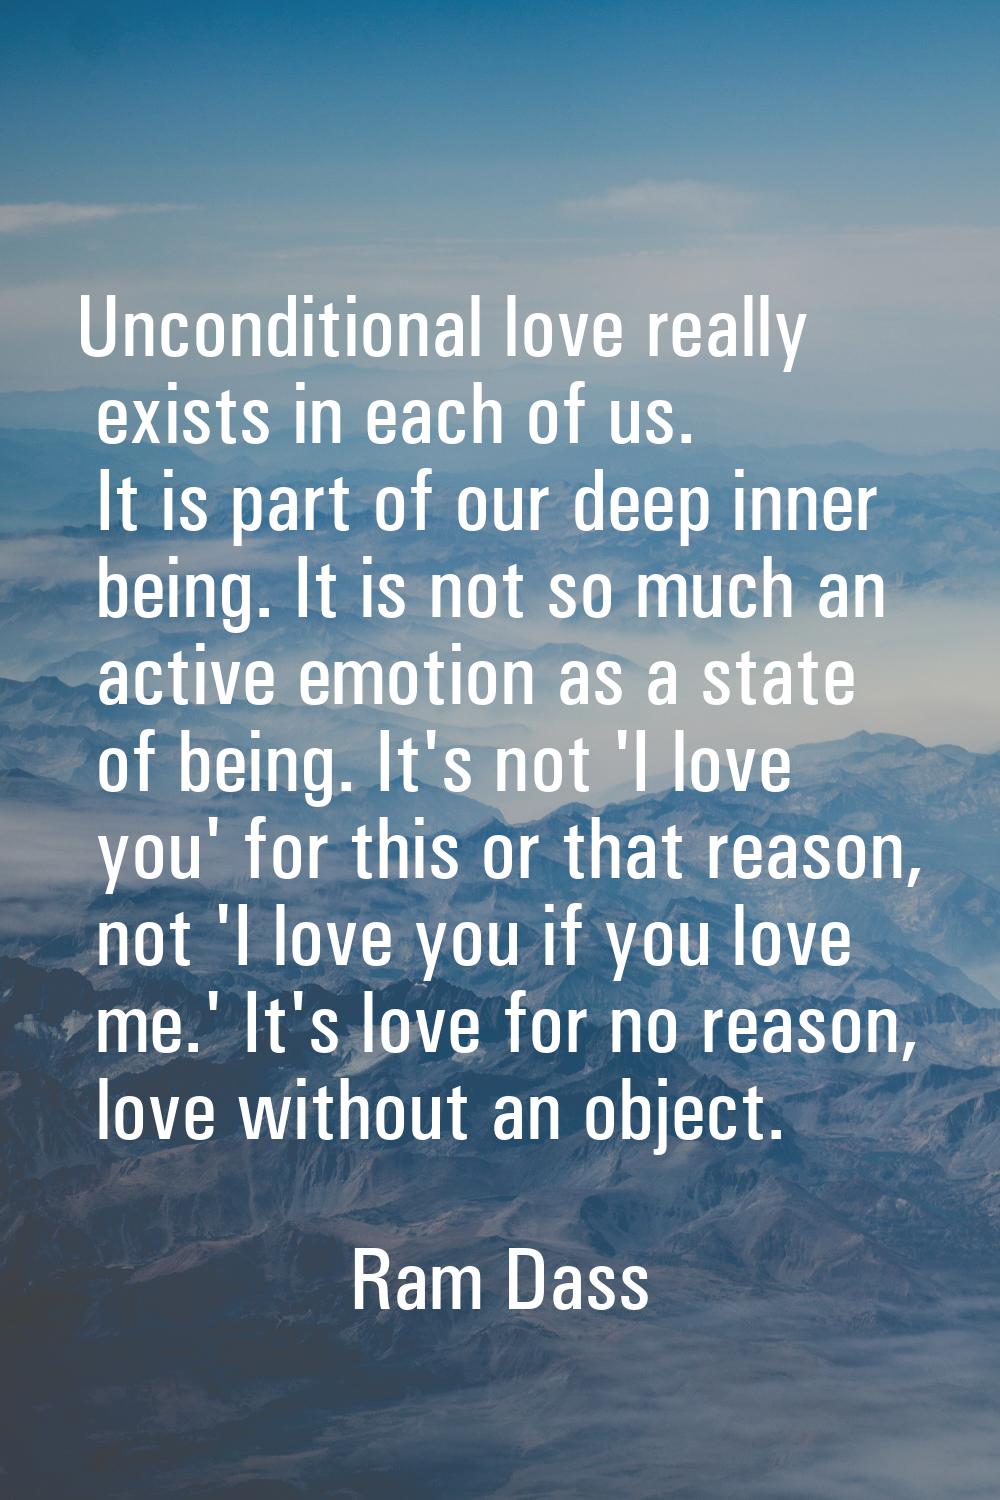 Unconditional love really exists in each of us. It is part of our deep inner being. It is not so mu